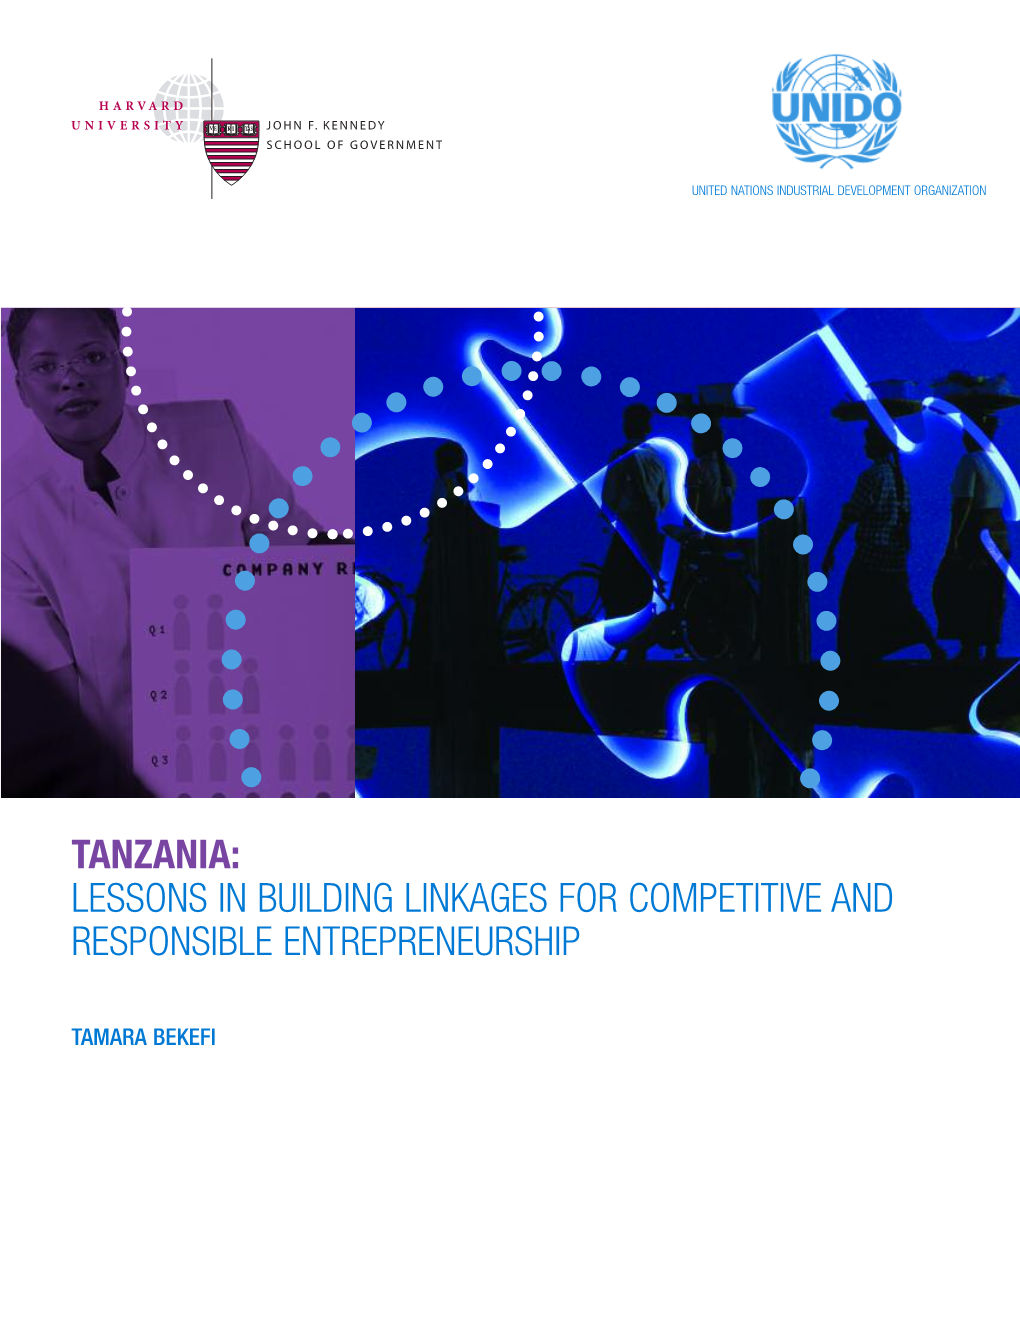 Tanzania: Lessons in Building Linkages for Competitive and Responsible Entrepreneurship